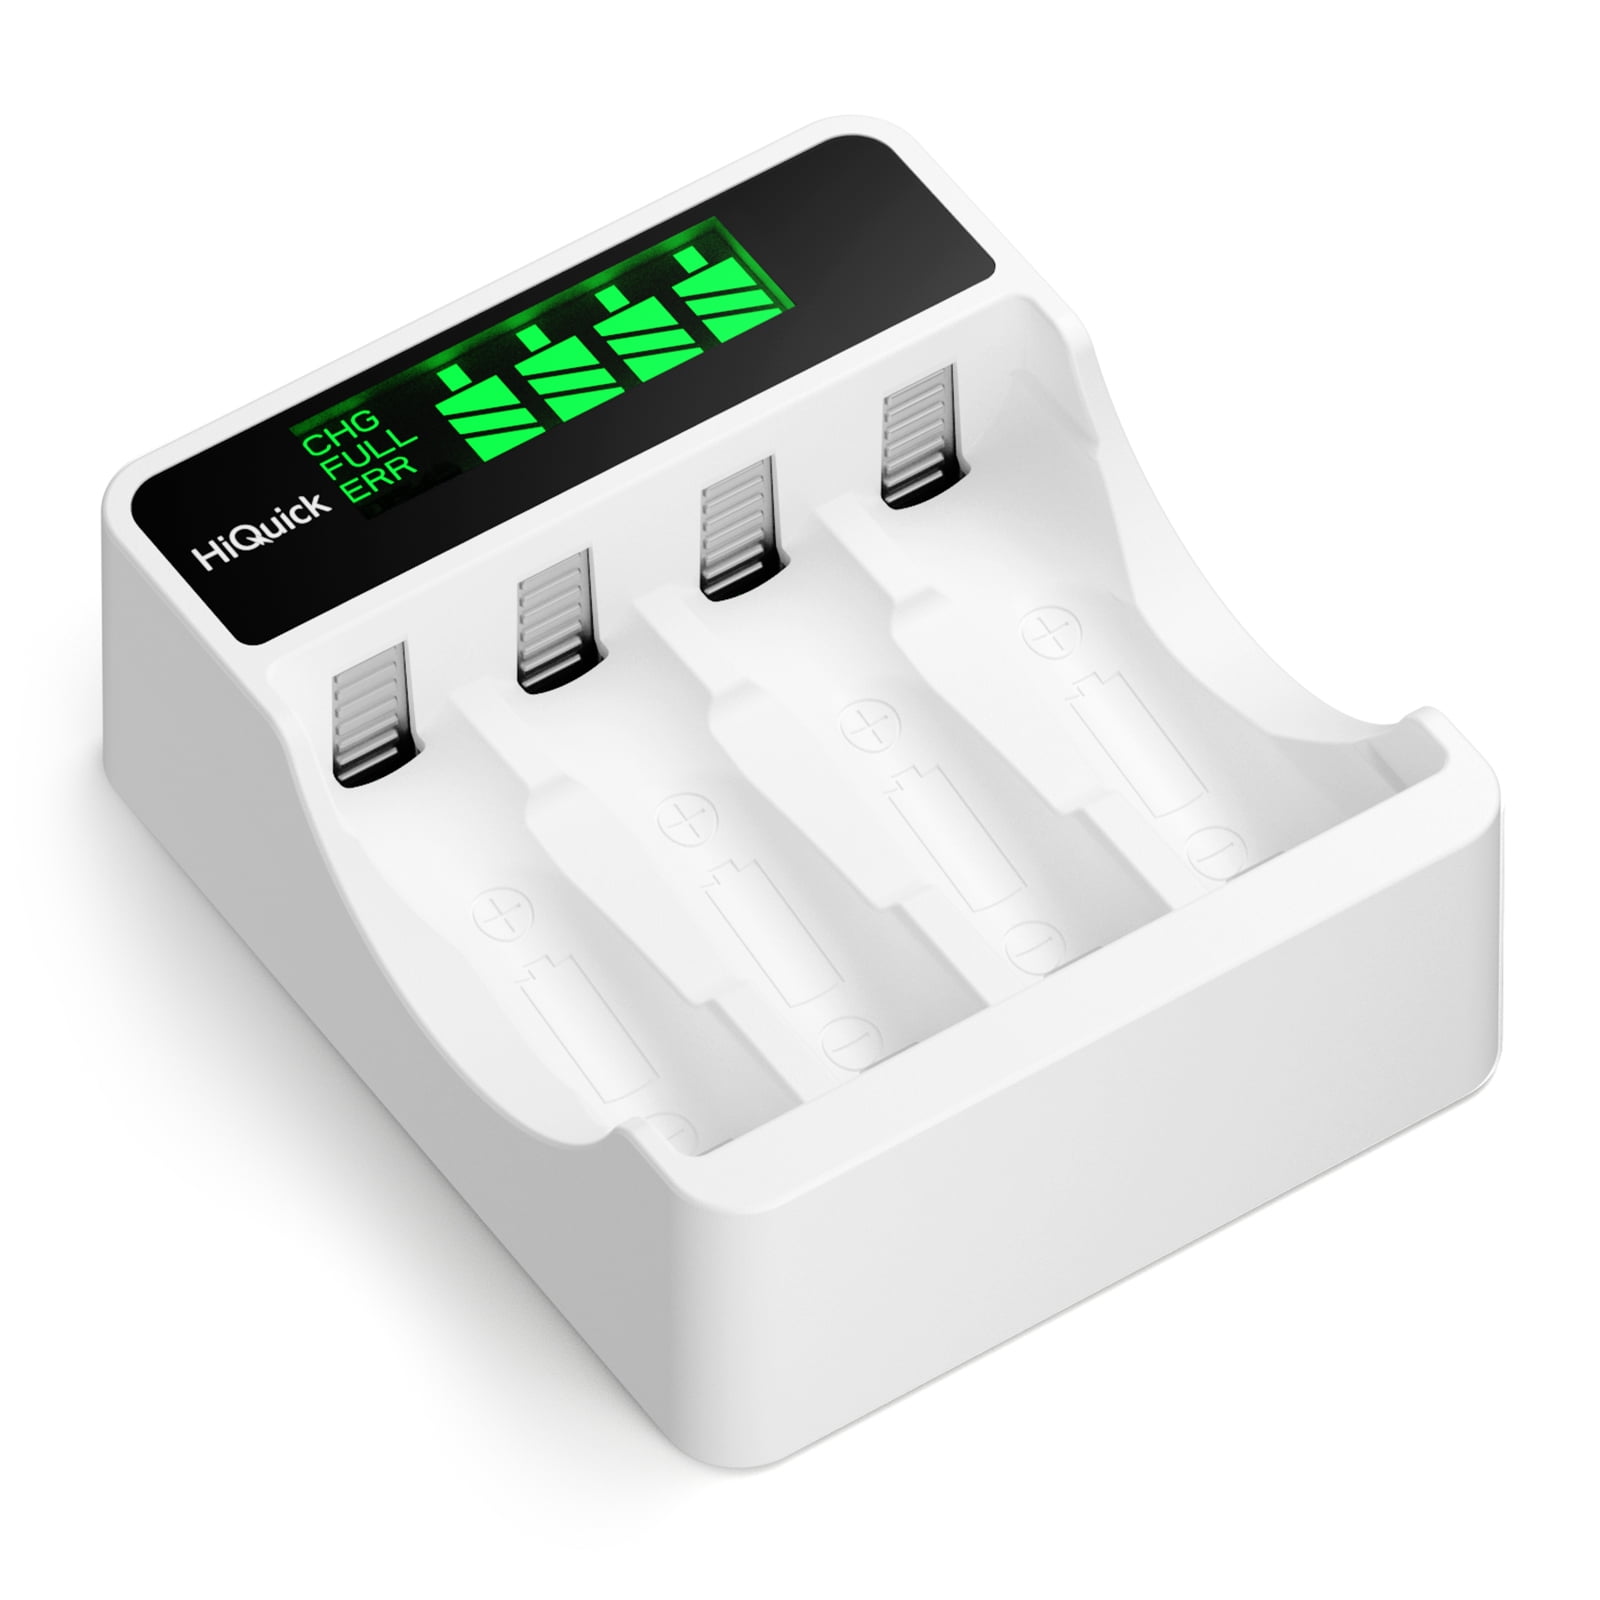 Mrupoo 4Pcs 1.5v 3200mWh AA Rechargeable Lithium Batteries with 4 Slots Ports AA AAA Battery 2 Hours Quick Charger Micro-USB Port Output at 1.5V 